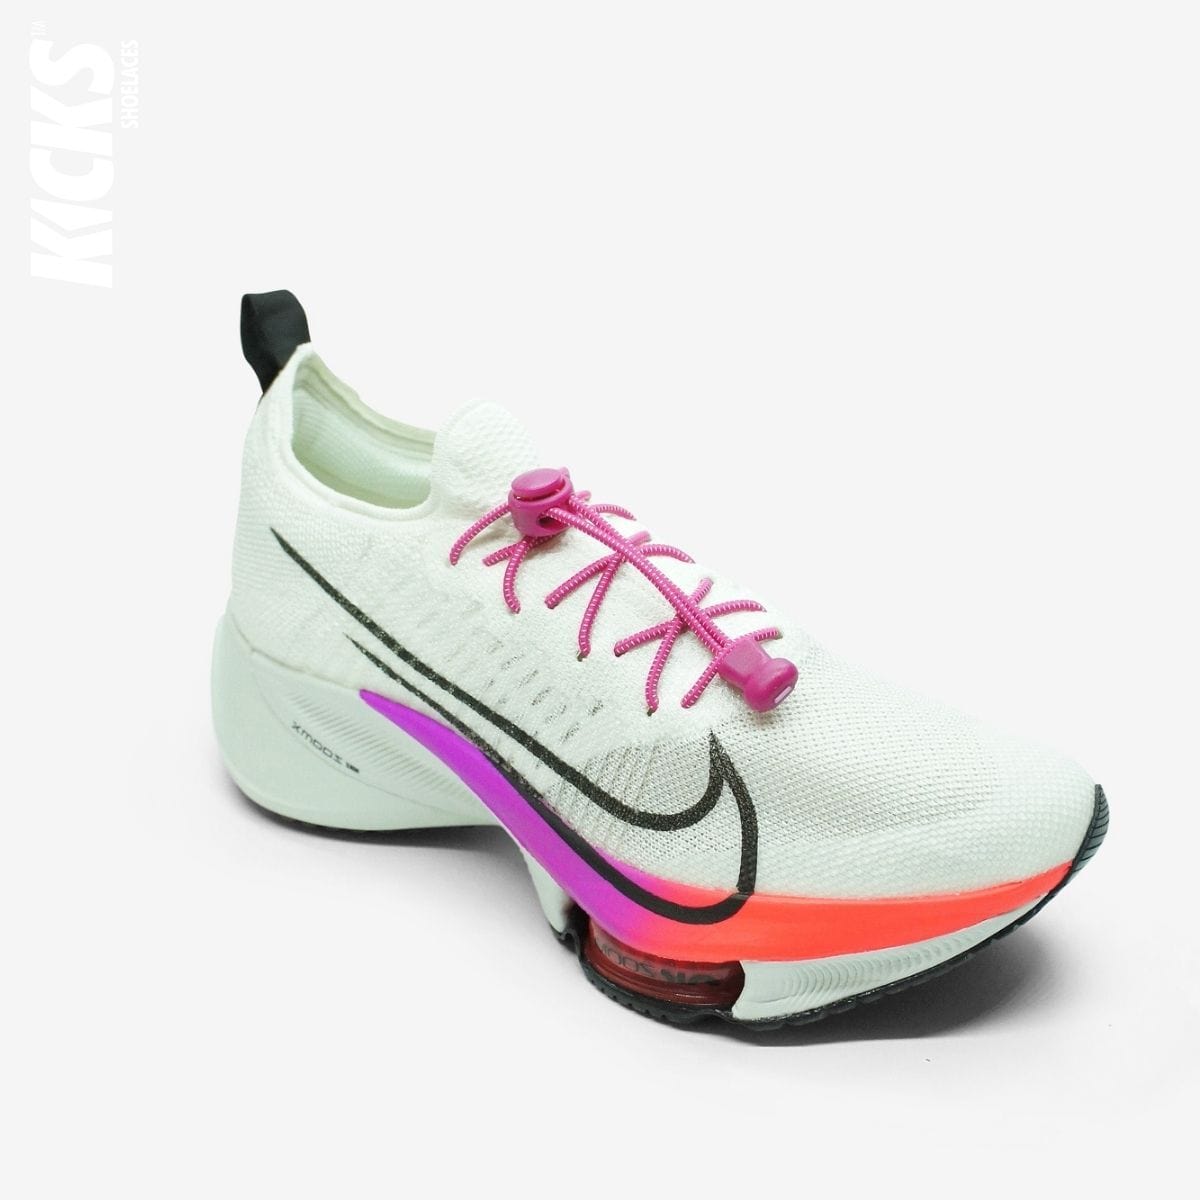 quick-laces-with-rose-pink-elastic-no-tie-shoelaces-on-nike-running-shoe-by-kicks-shoelaces